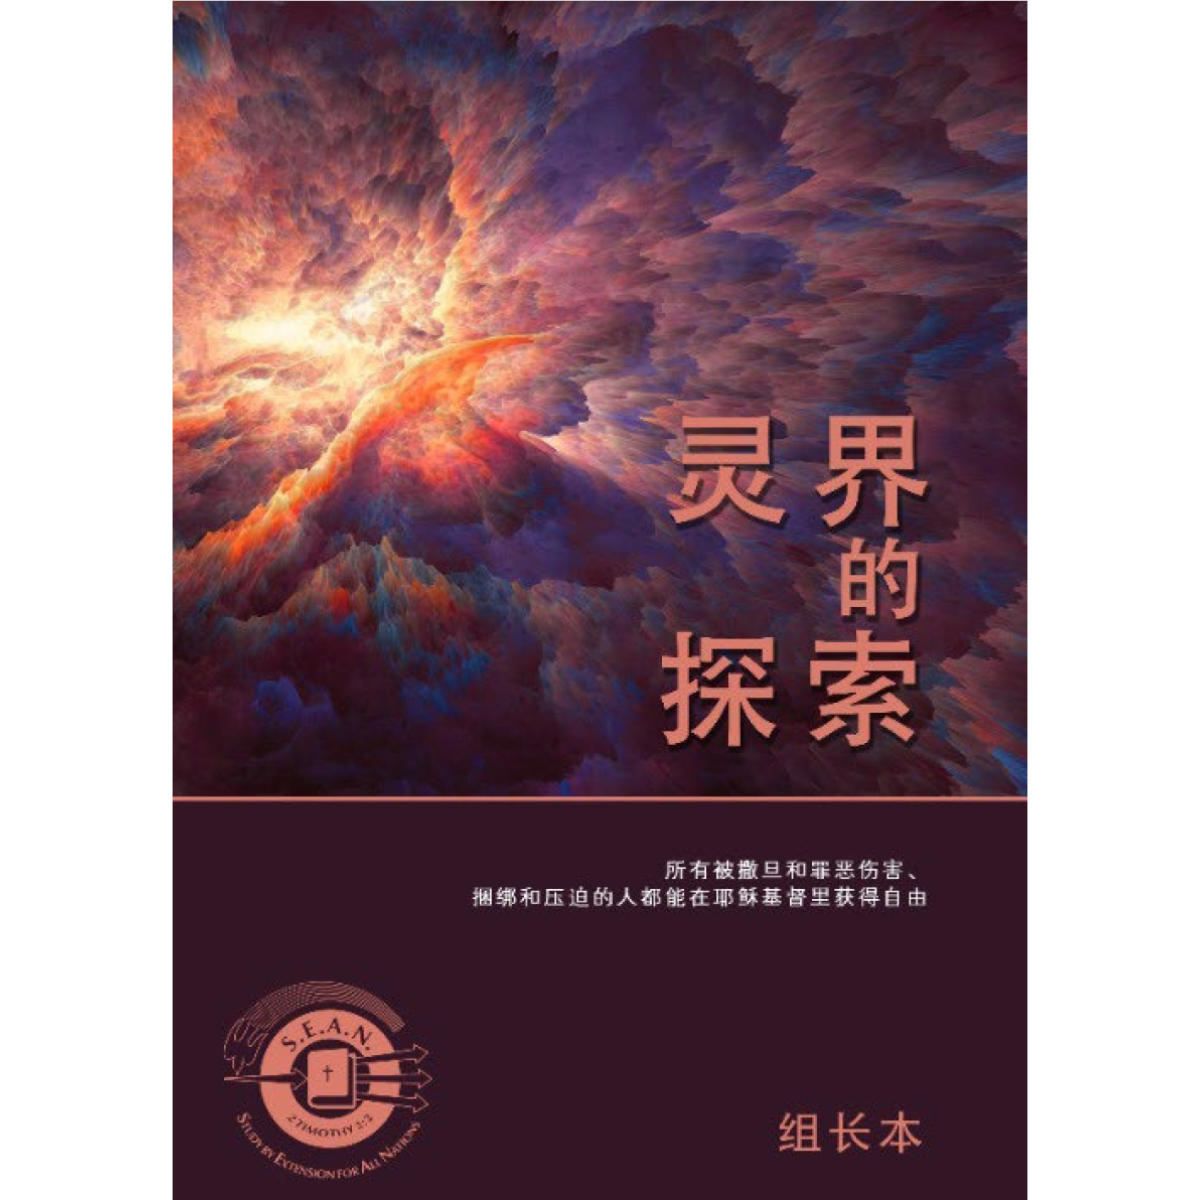 The Spirit World - Leader's Guide (Chinese Simplified)